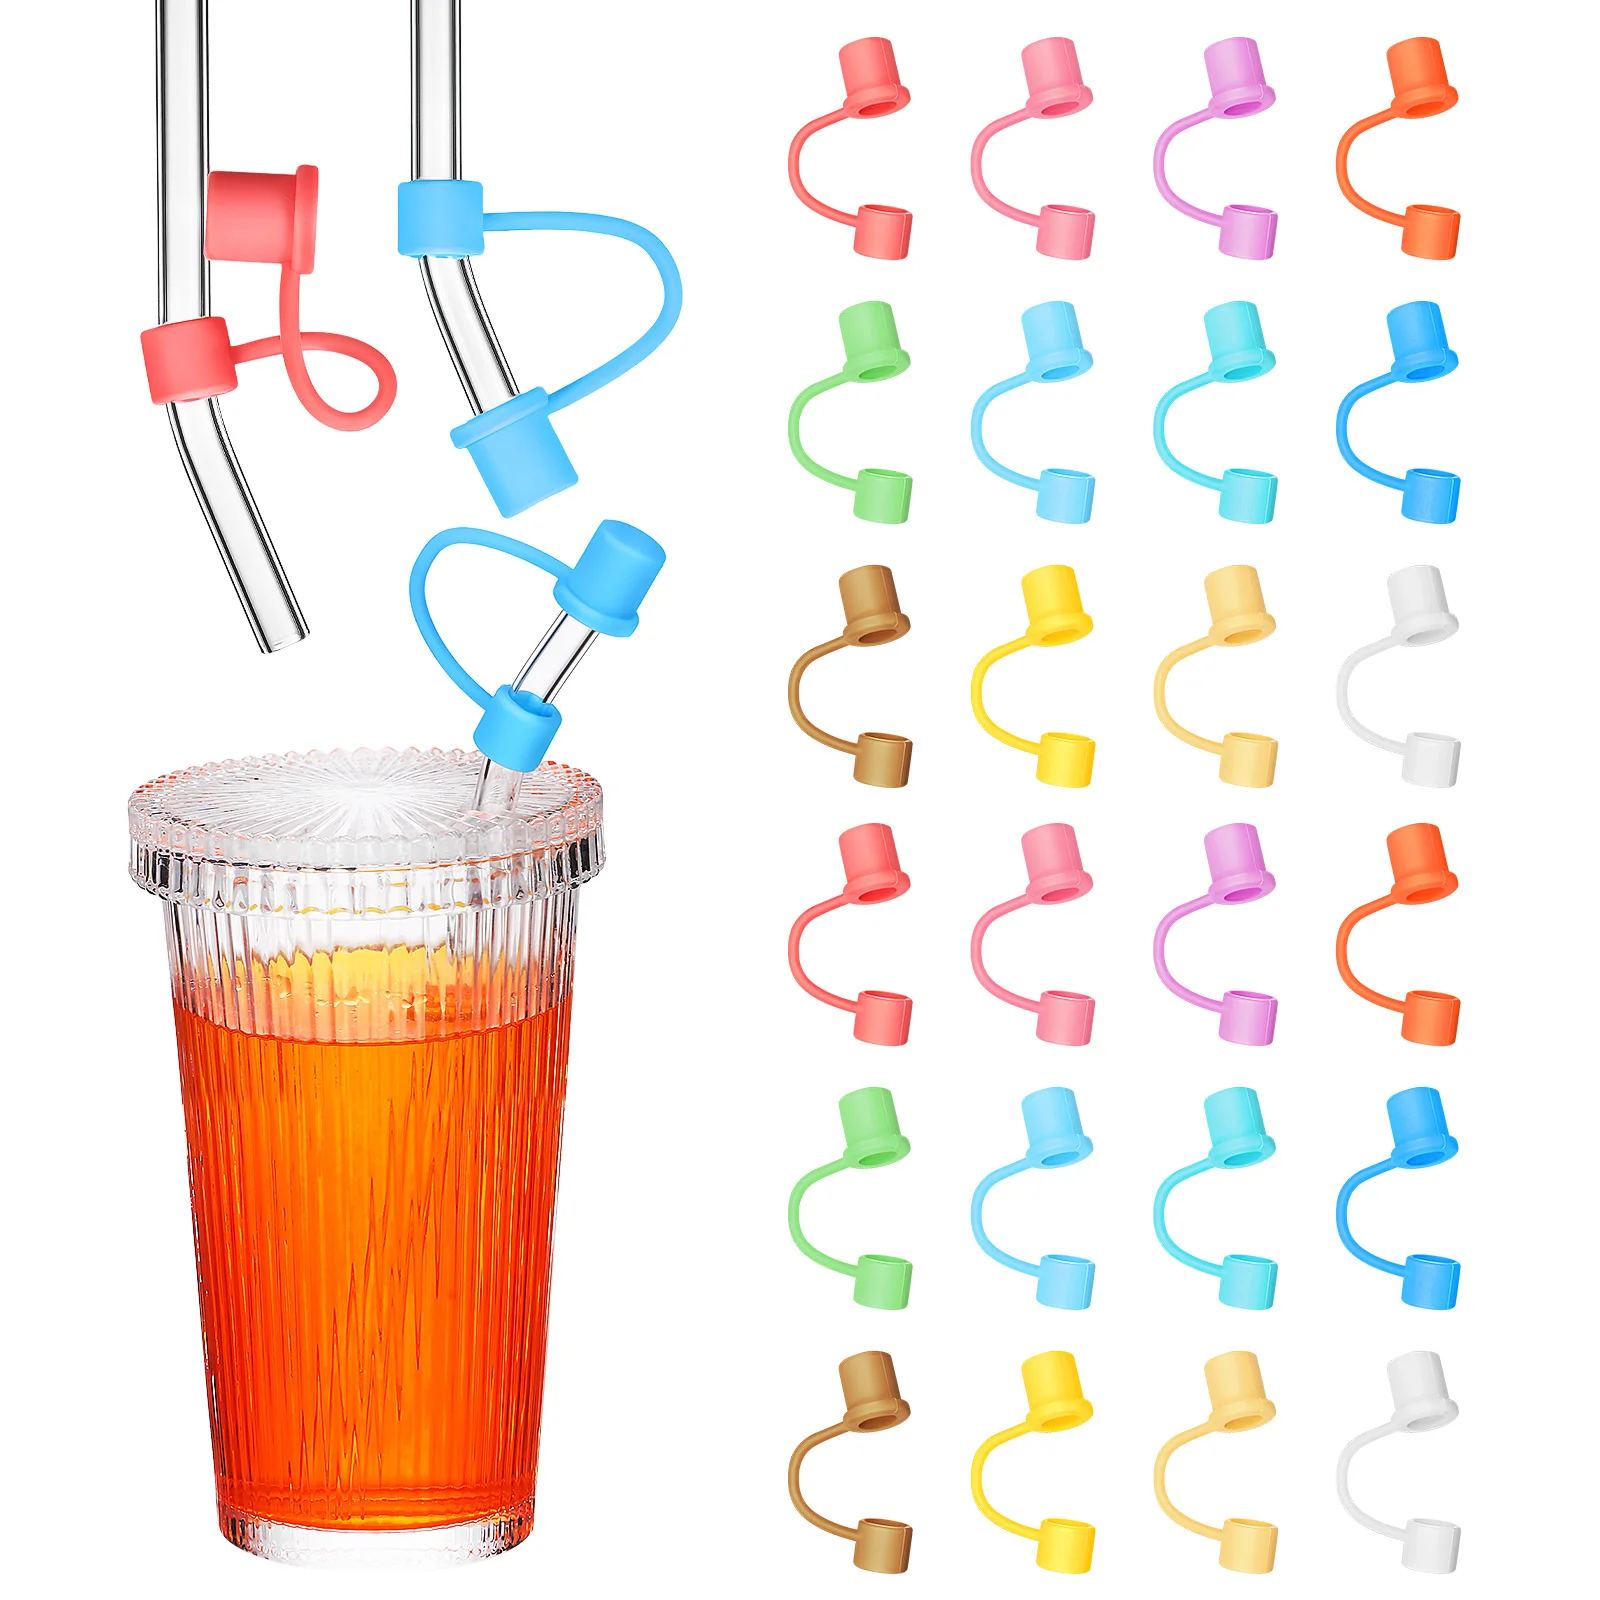 

10mm Silicone Straw Tips Drinking Dust Cap Splash Proof Plugs Cover Reusable Straw Sealing Tools Kitchen Bar Tools